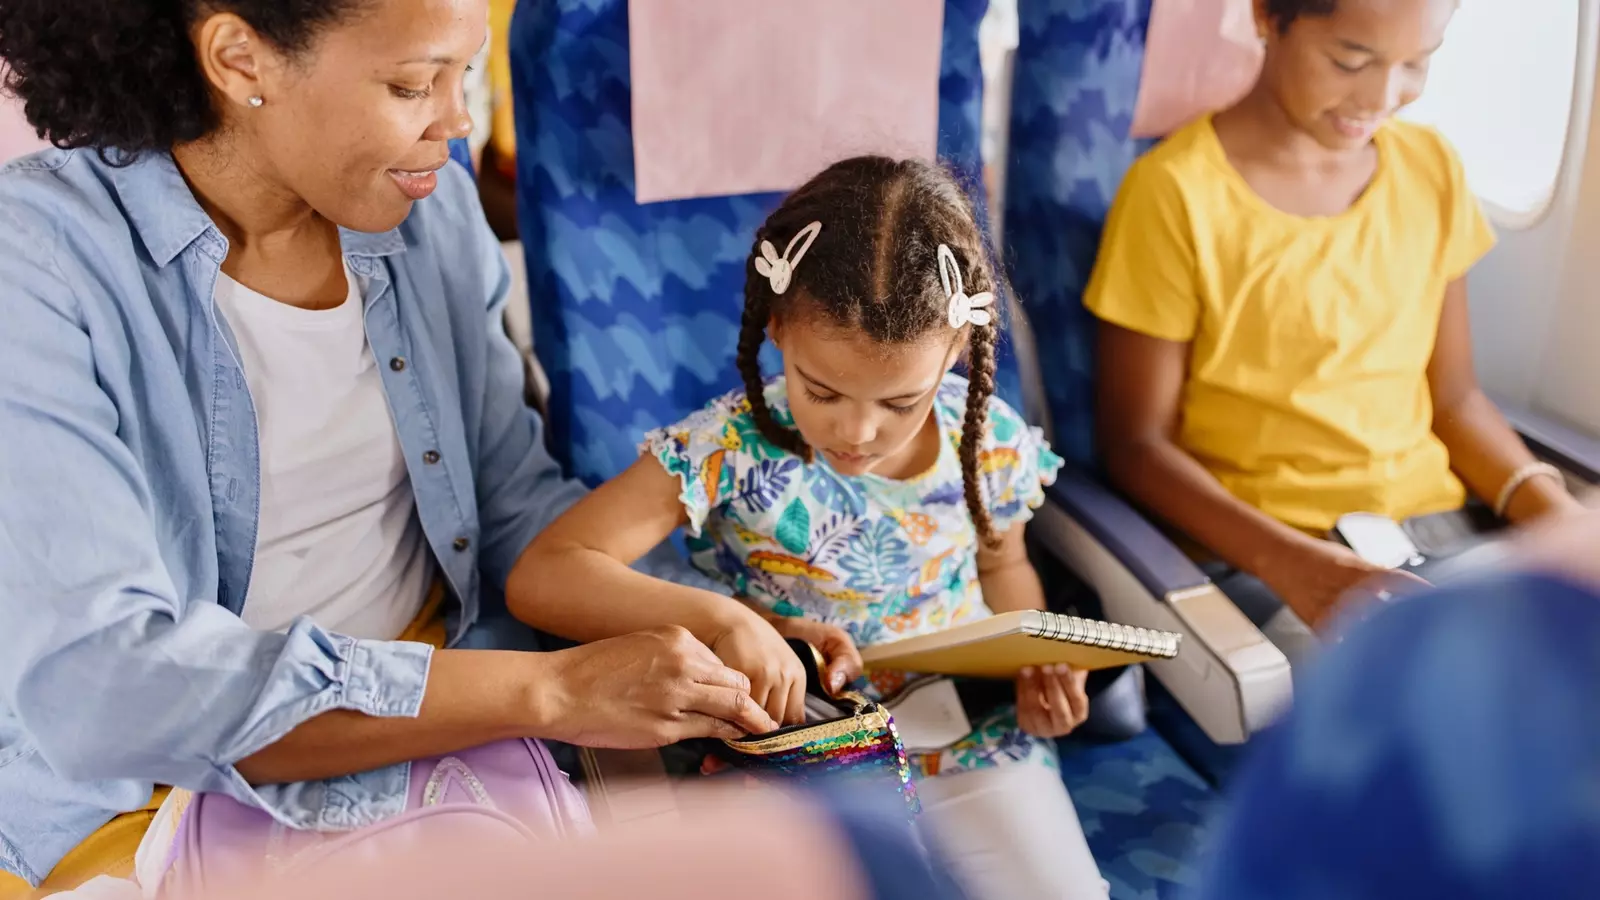 Women often volunteer to be sit between kids and be the snack-and-toys-and-tantrum-wrangler on airplane flights.